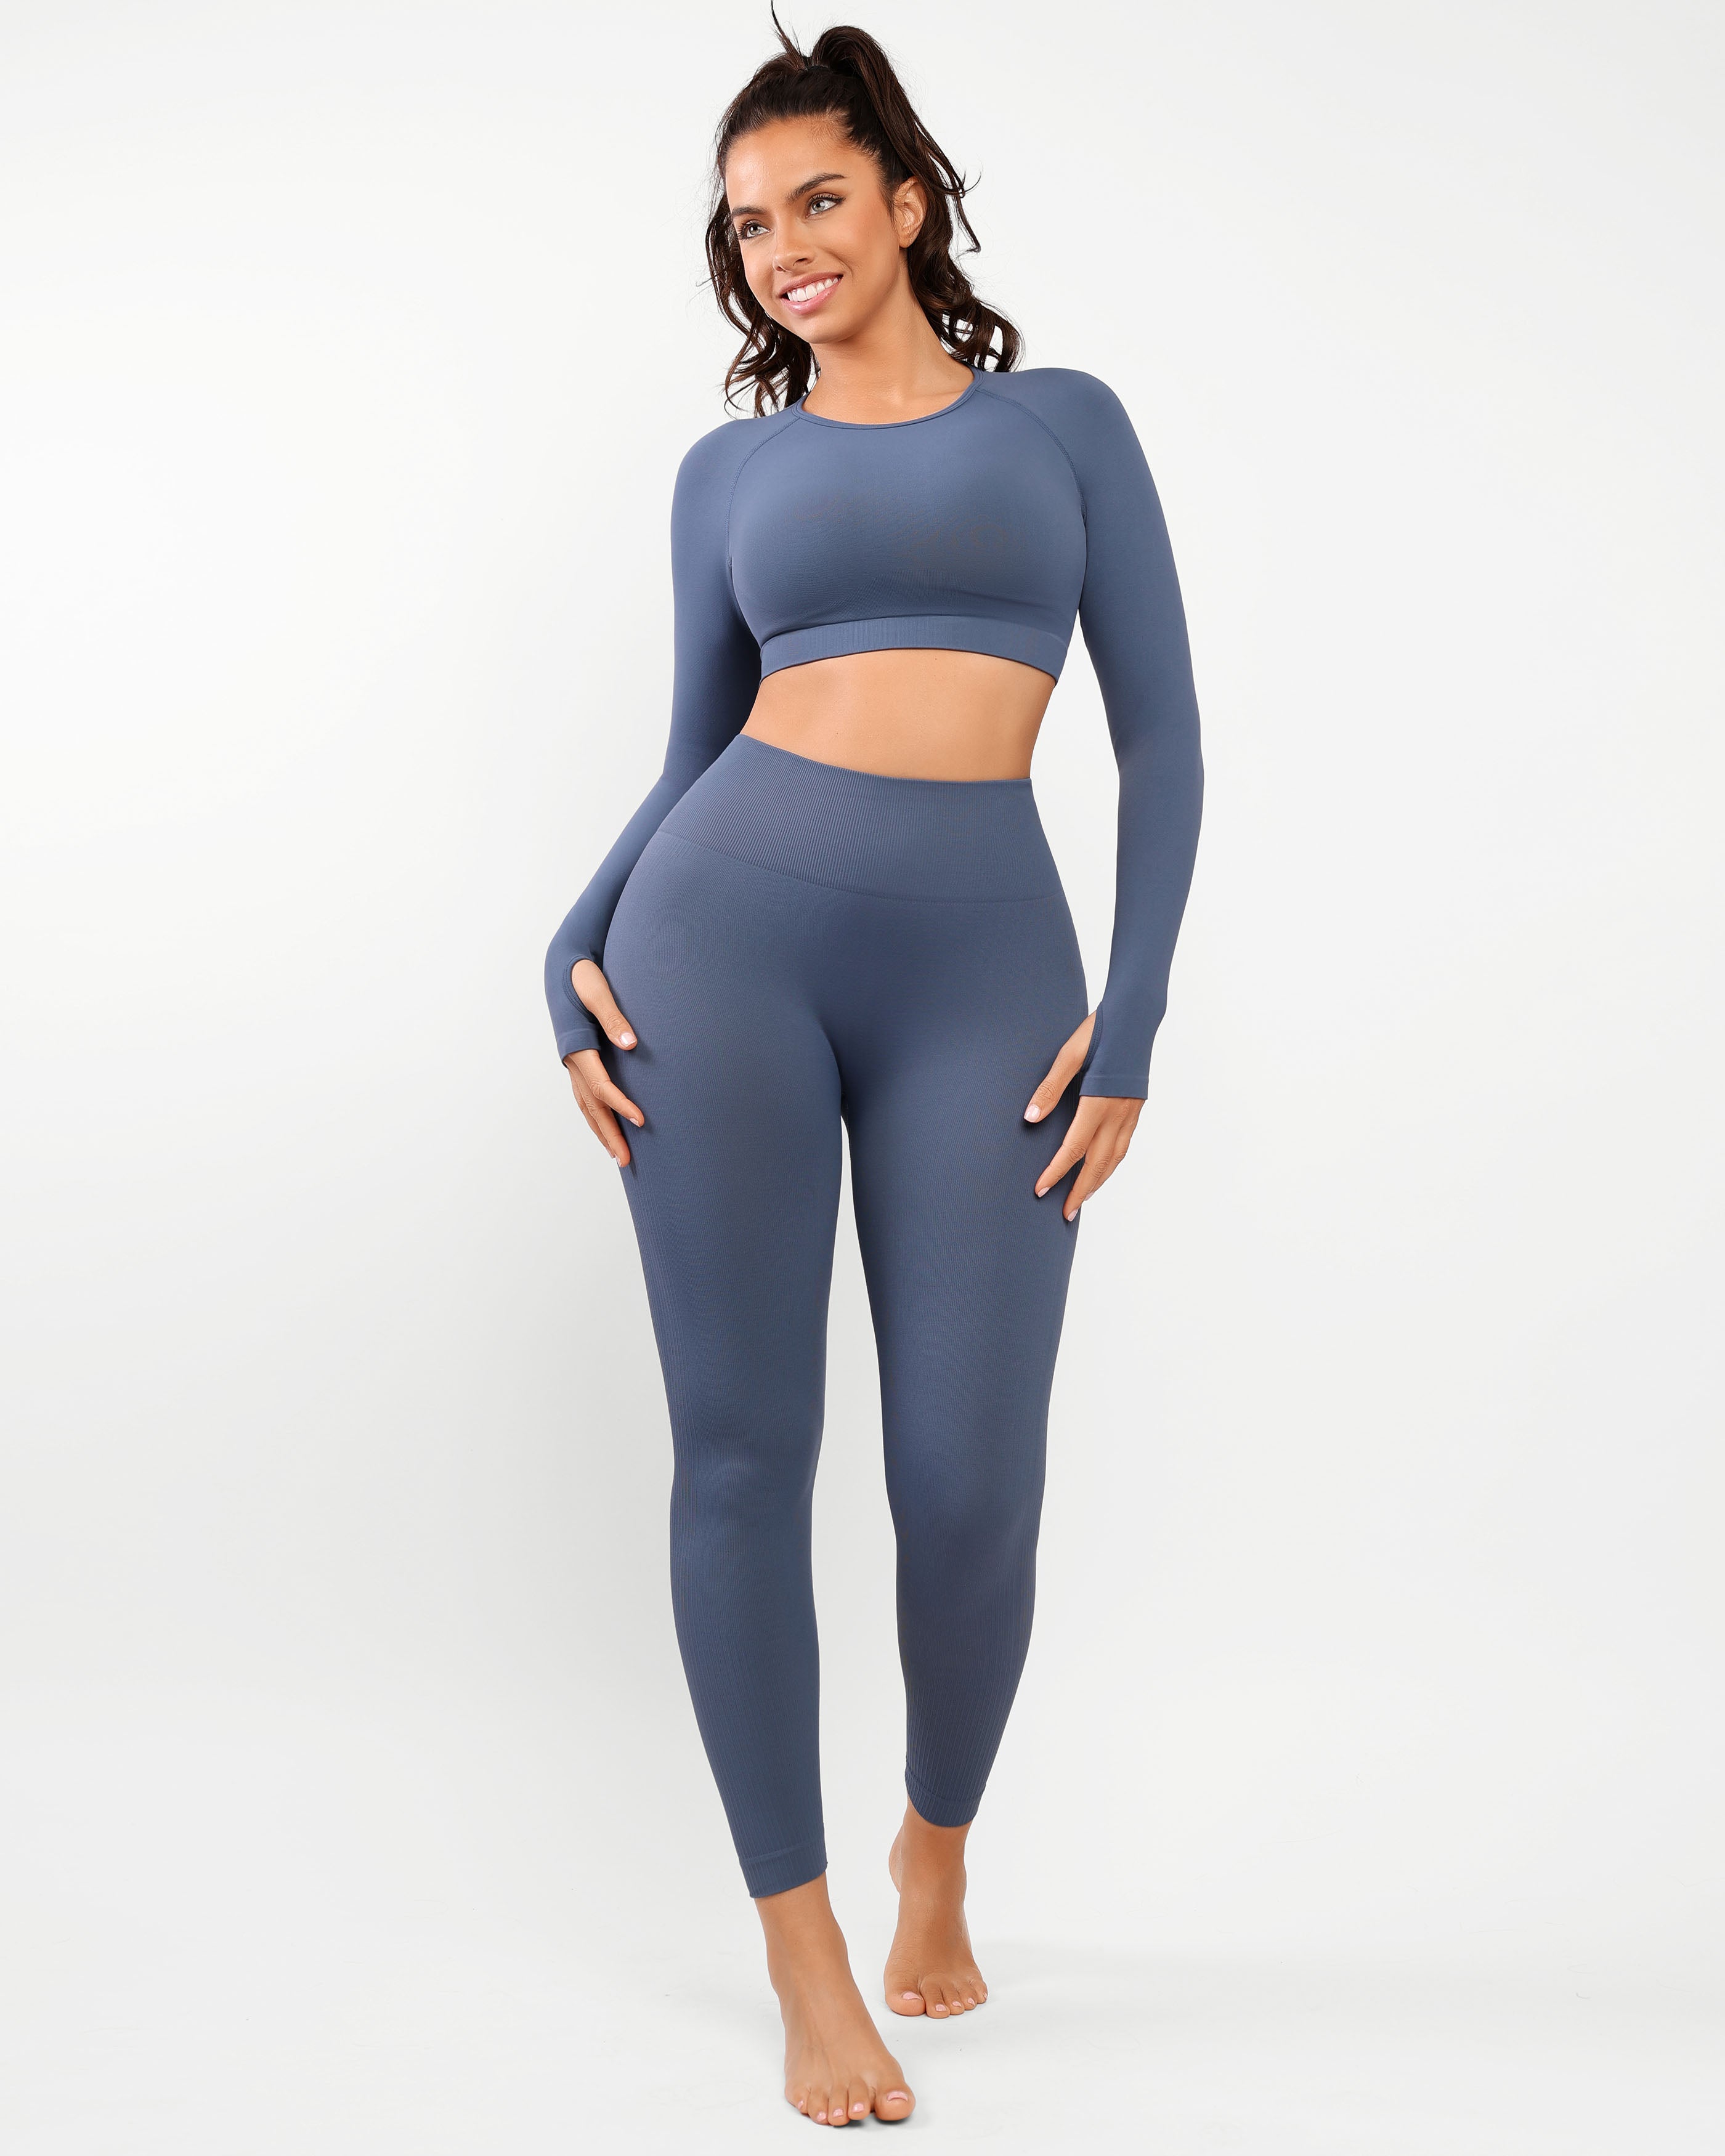  Cosmolle Workout Sets Long Sleeve Outfits for Women Tummy  Control Gym Outfit 2 Piece Set Yoga High Waist Leggings Ribbed Seamless  (Brown,Medium) : Clothing, Shoes & Jewelry